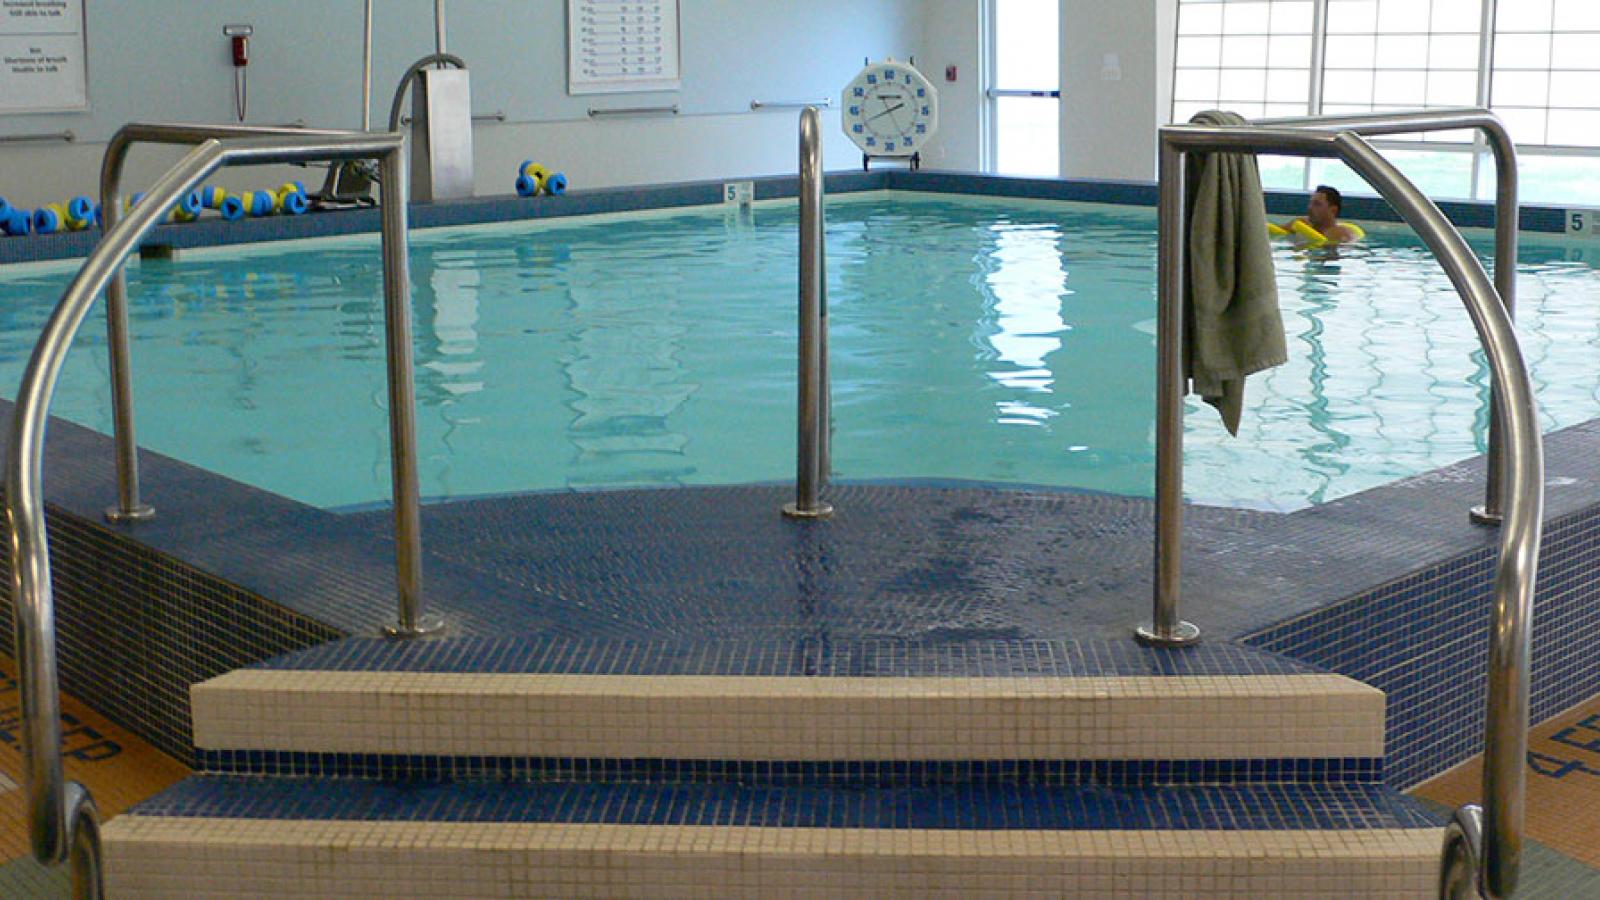 Therapy Pool